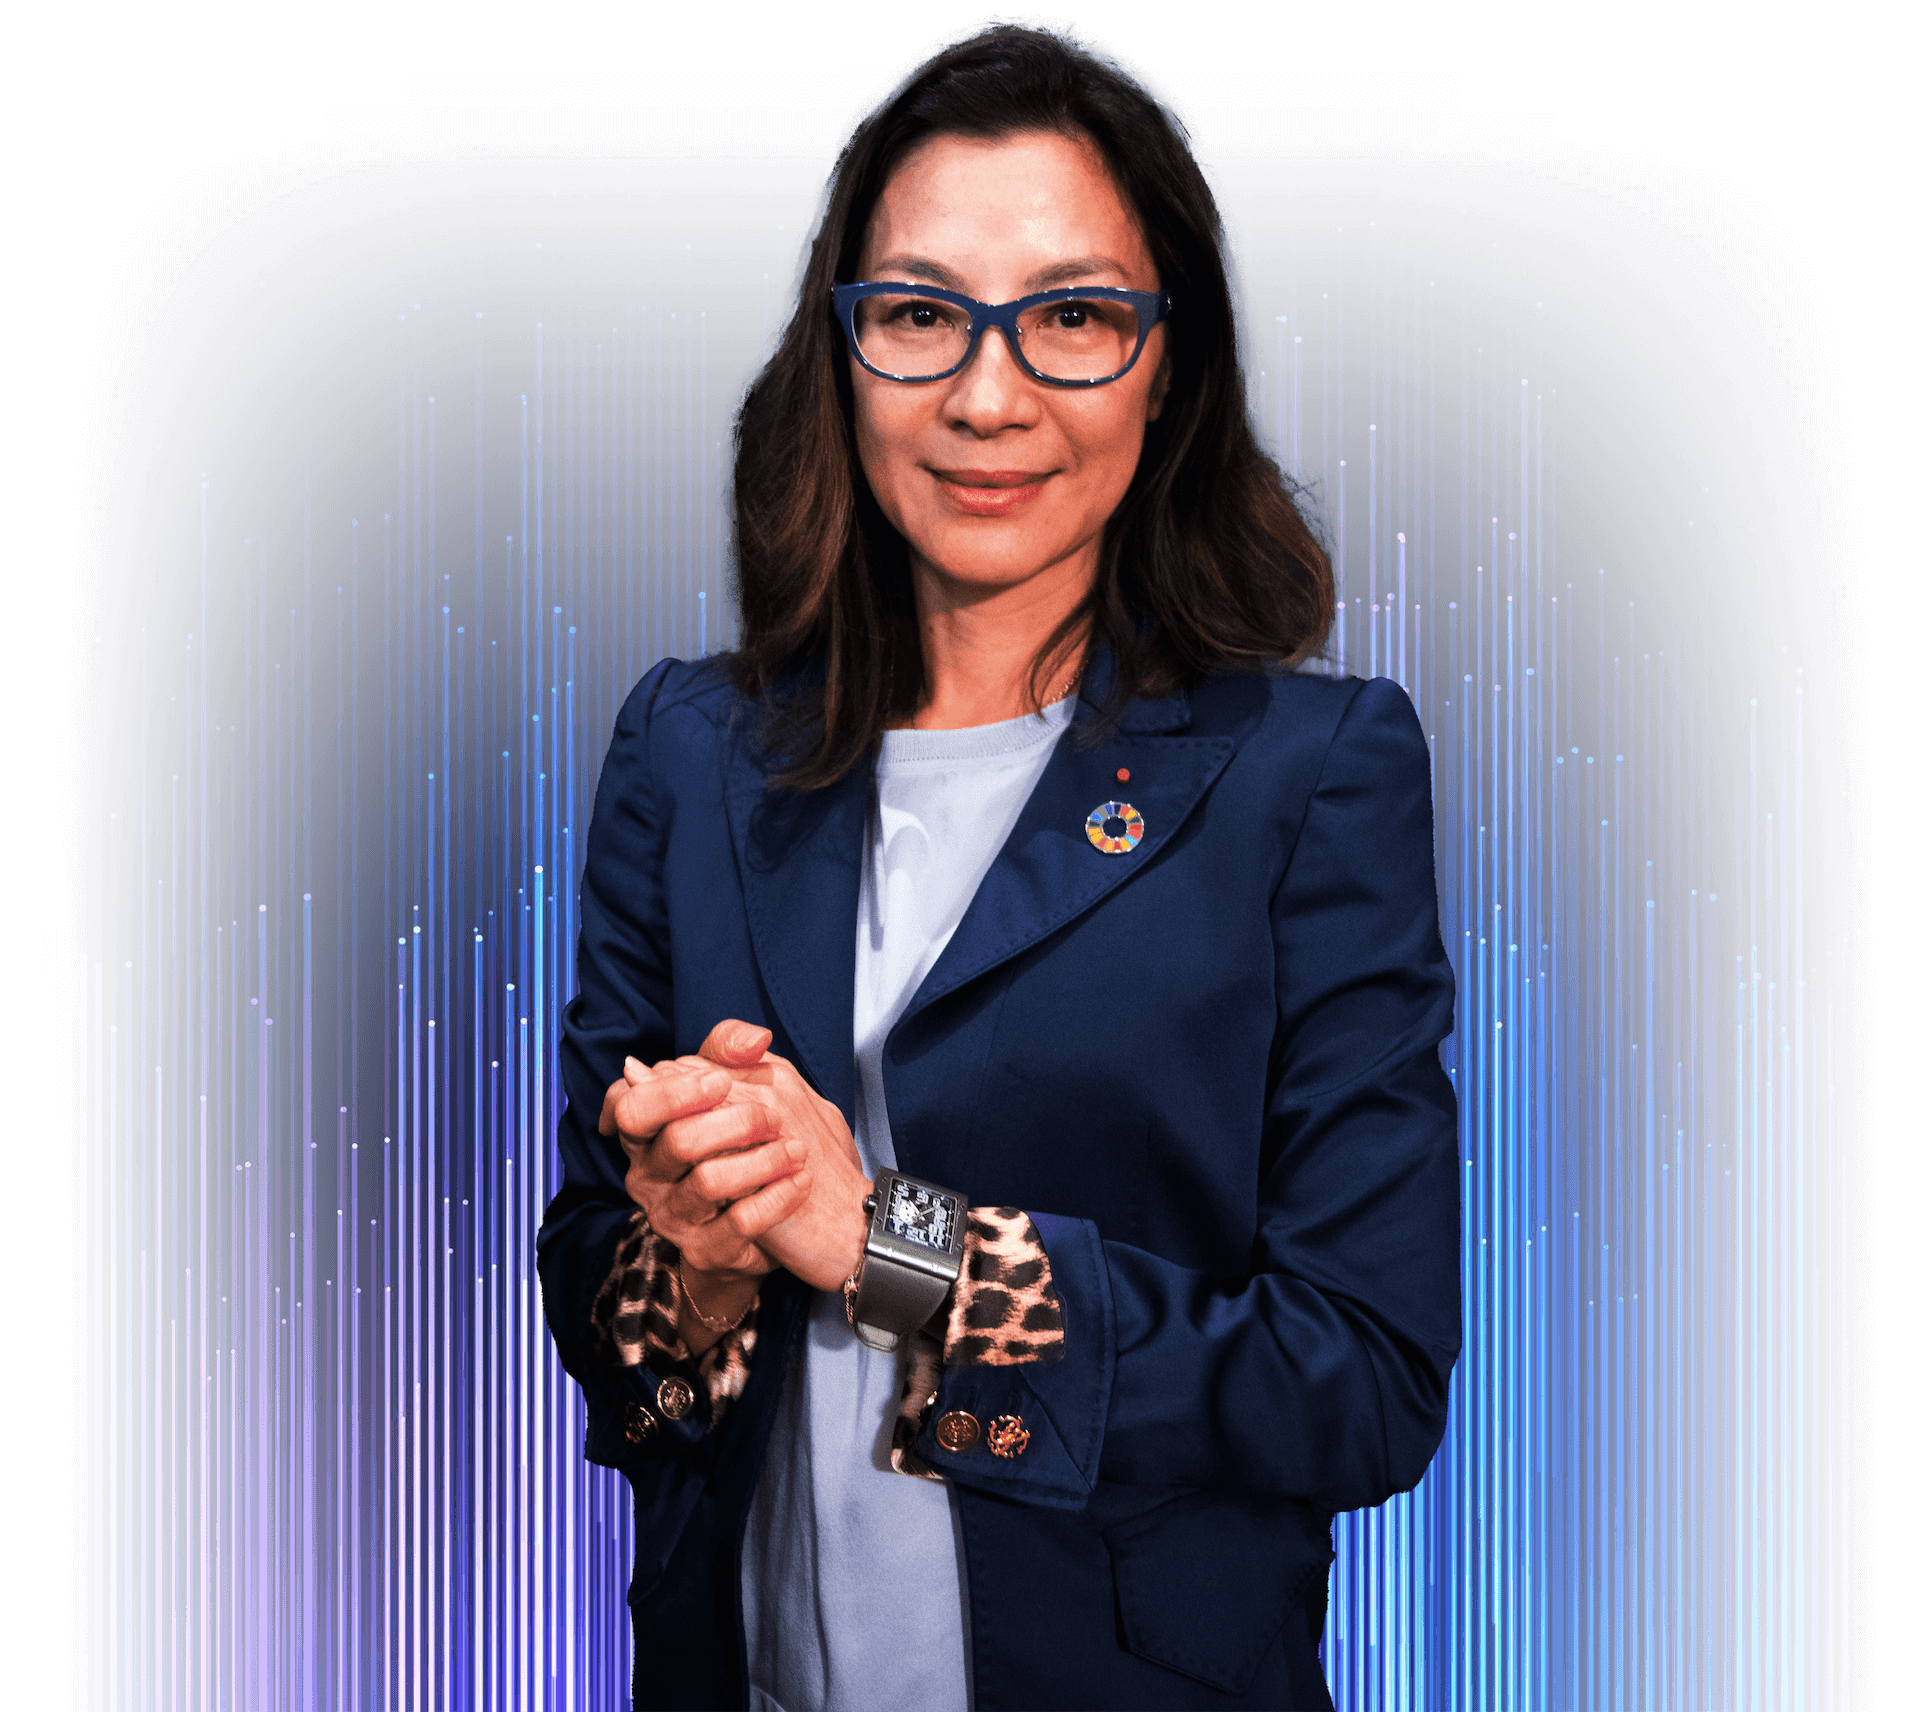 Photo of the Oscar winner actor Michelle Yeoh wearing the SDG pin